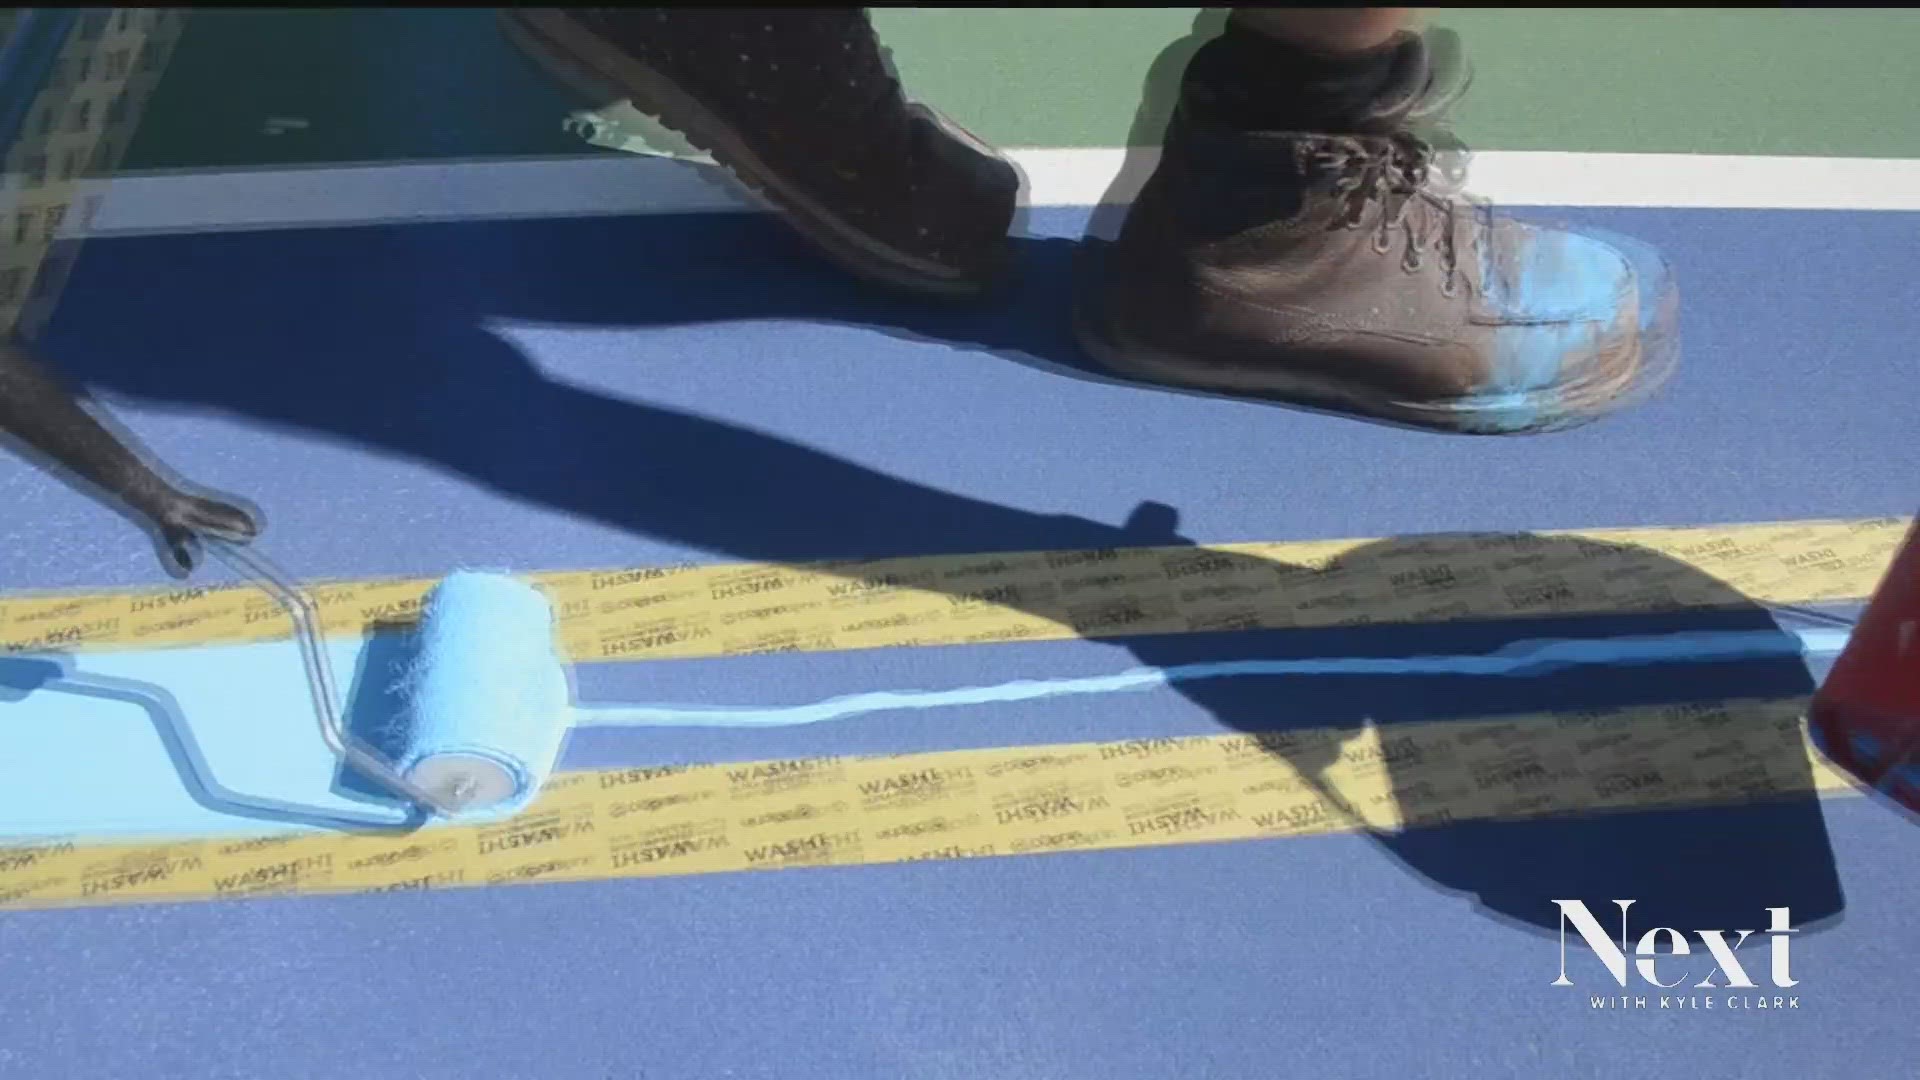 Denver Parks & Rec is adding six more pickleball courts at Martin Luther King Jr. Park after the city closed courts at Congress Park and cancelled other projects.